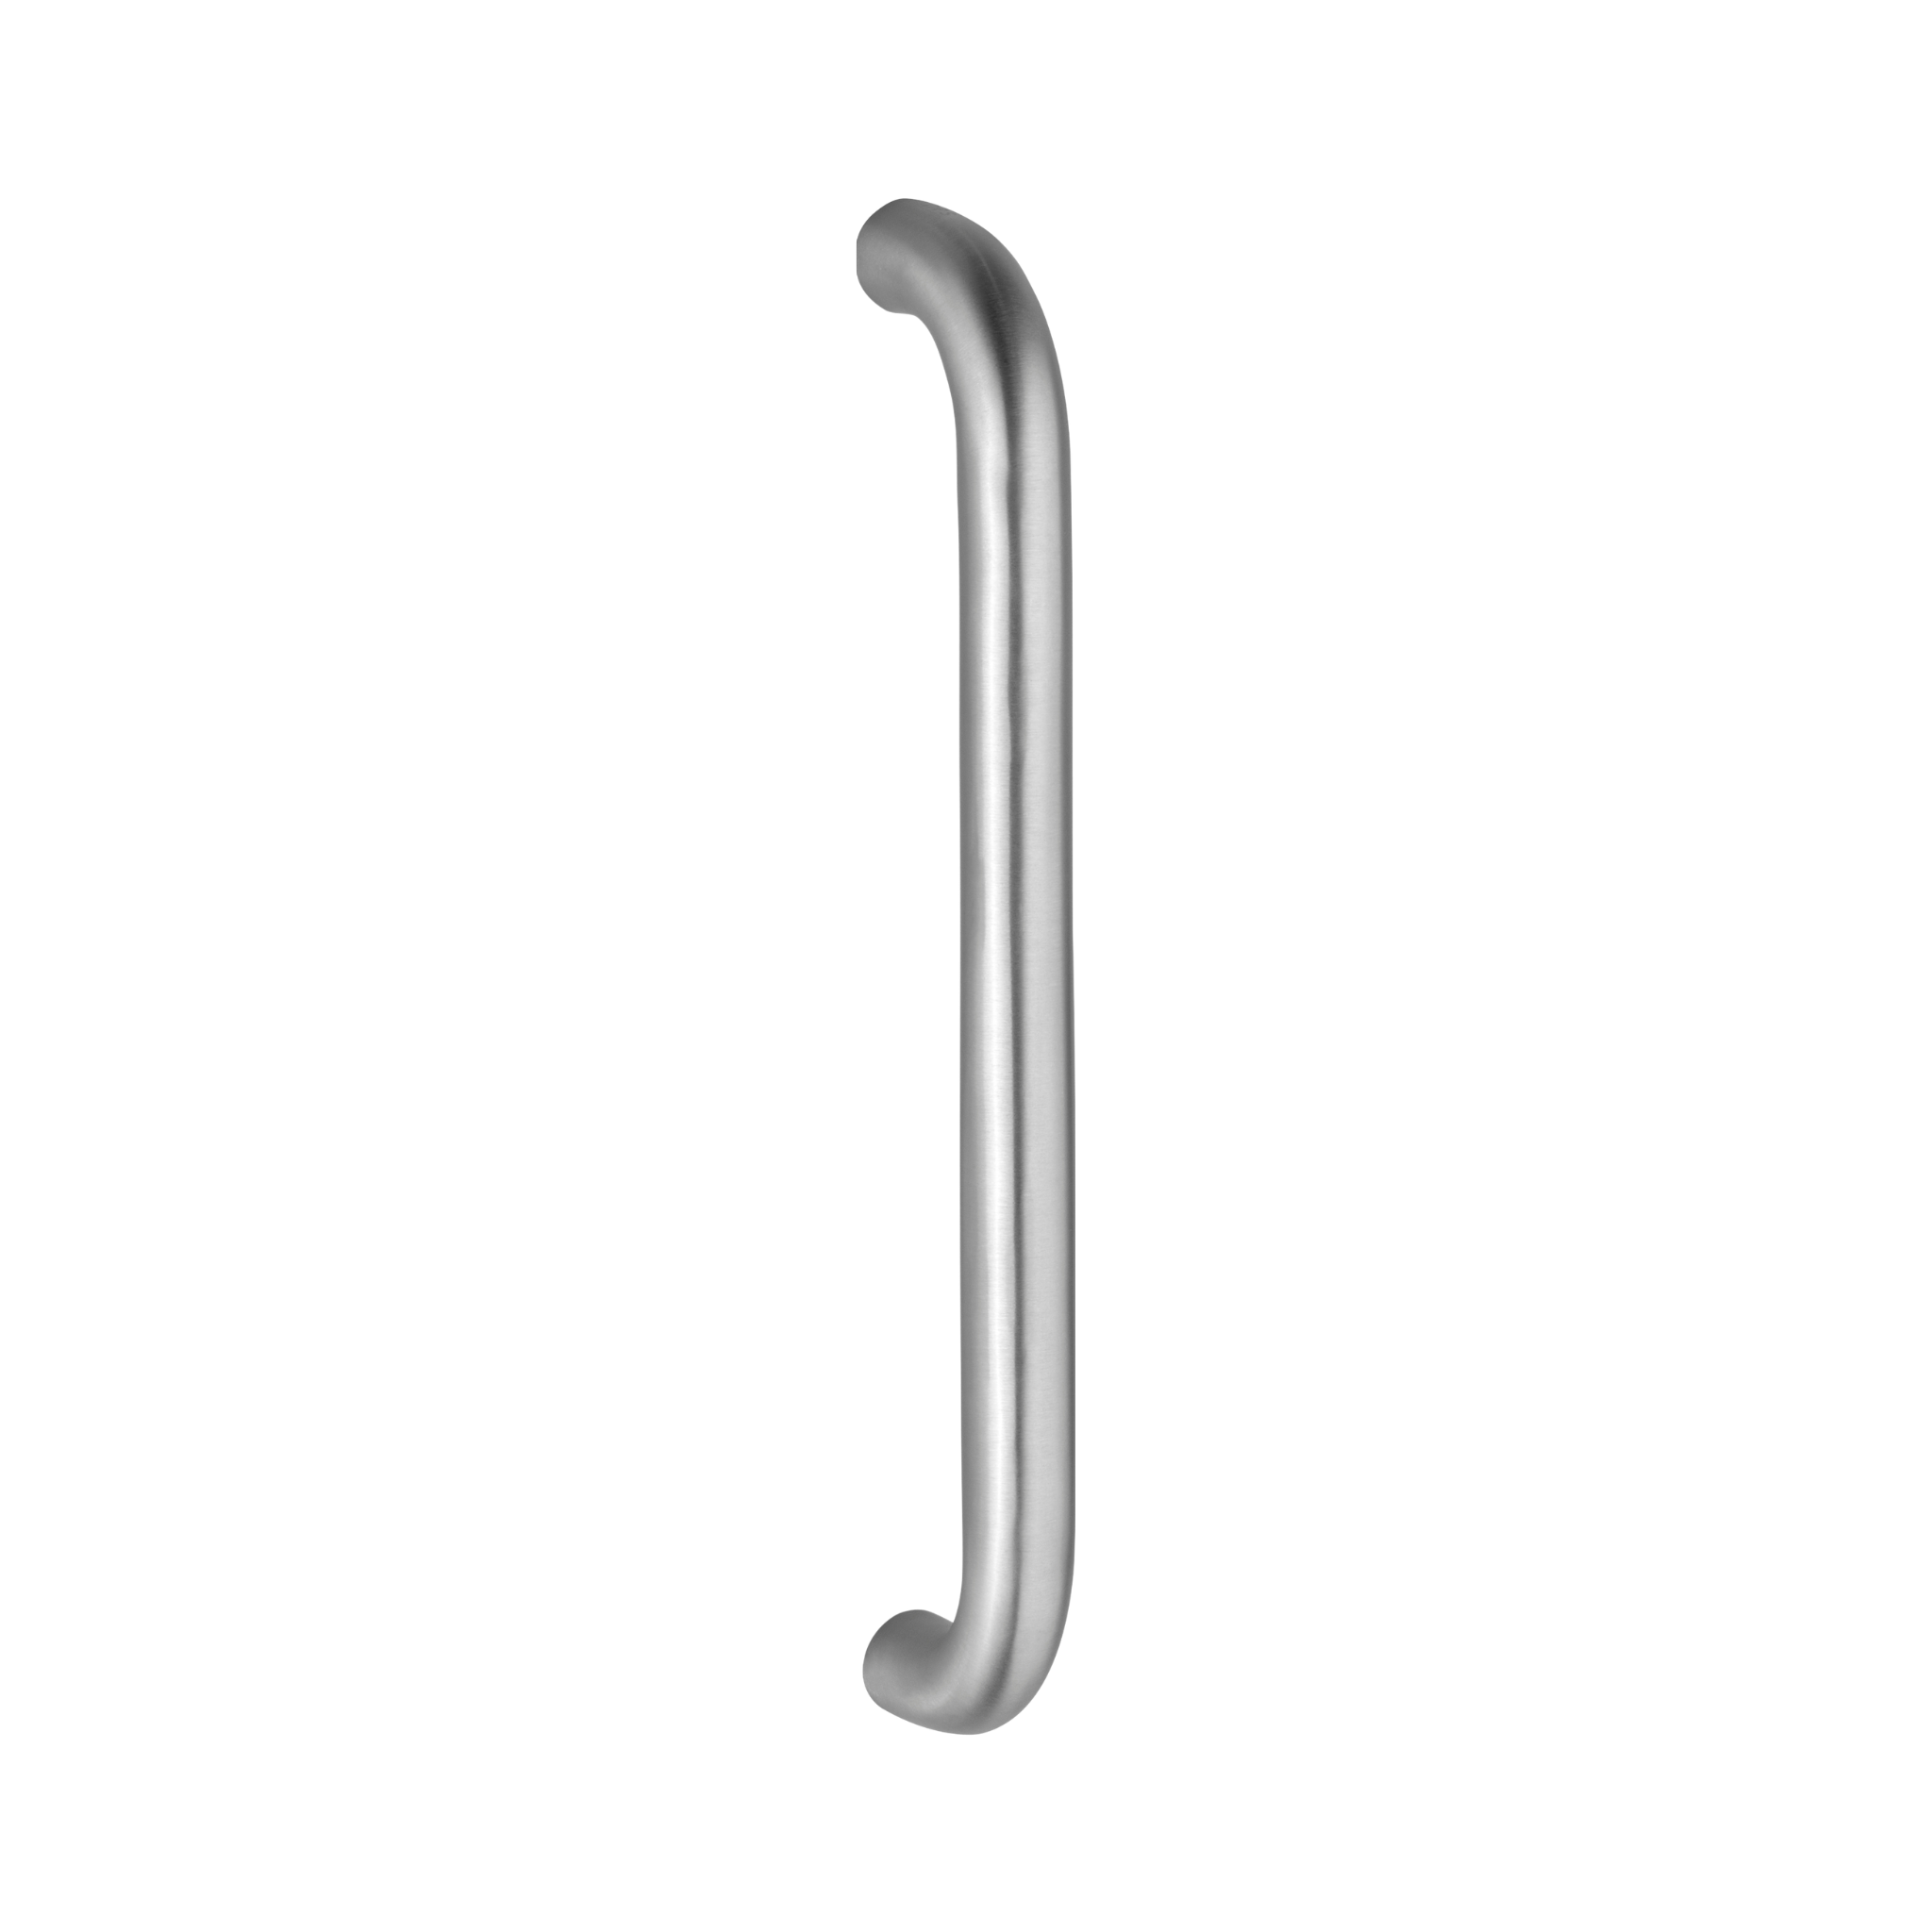 FP.D07.BTF.TR, Pull Handle, Tubular, D Handle, BoltThru, 19mm (Ø) x 200mm (l) x 181mm (ctc), Stainless Steel with Tarnish Resistant, CISA